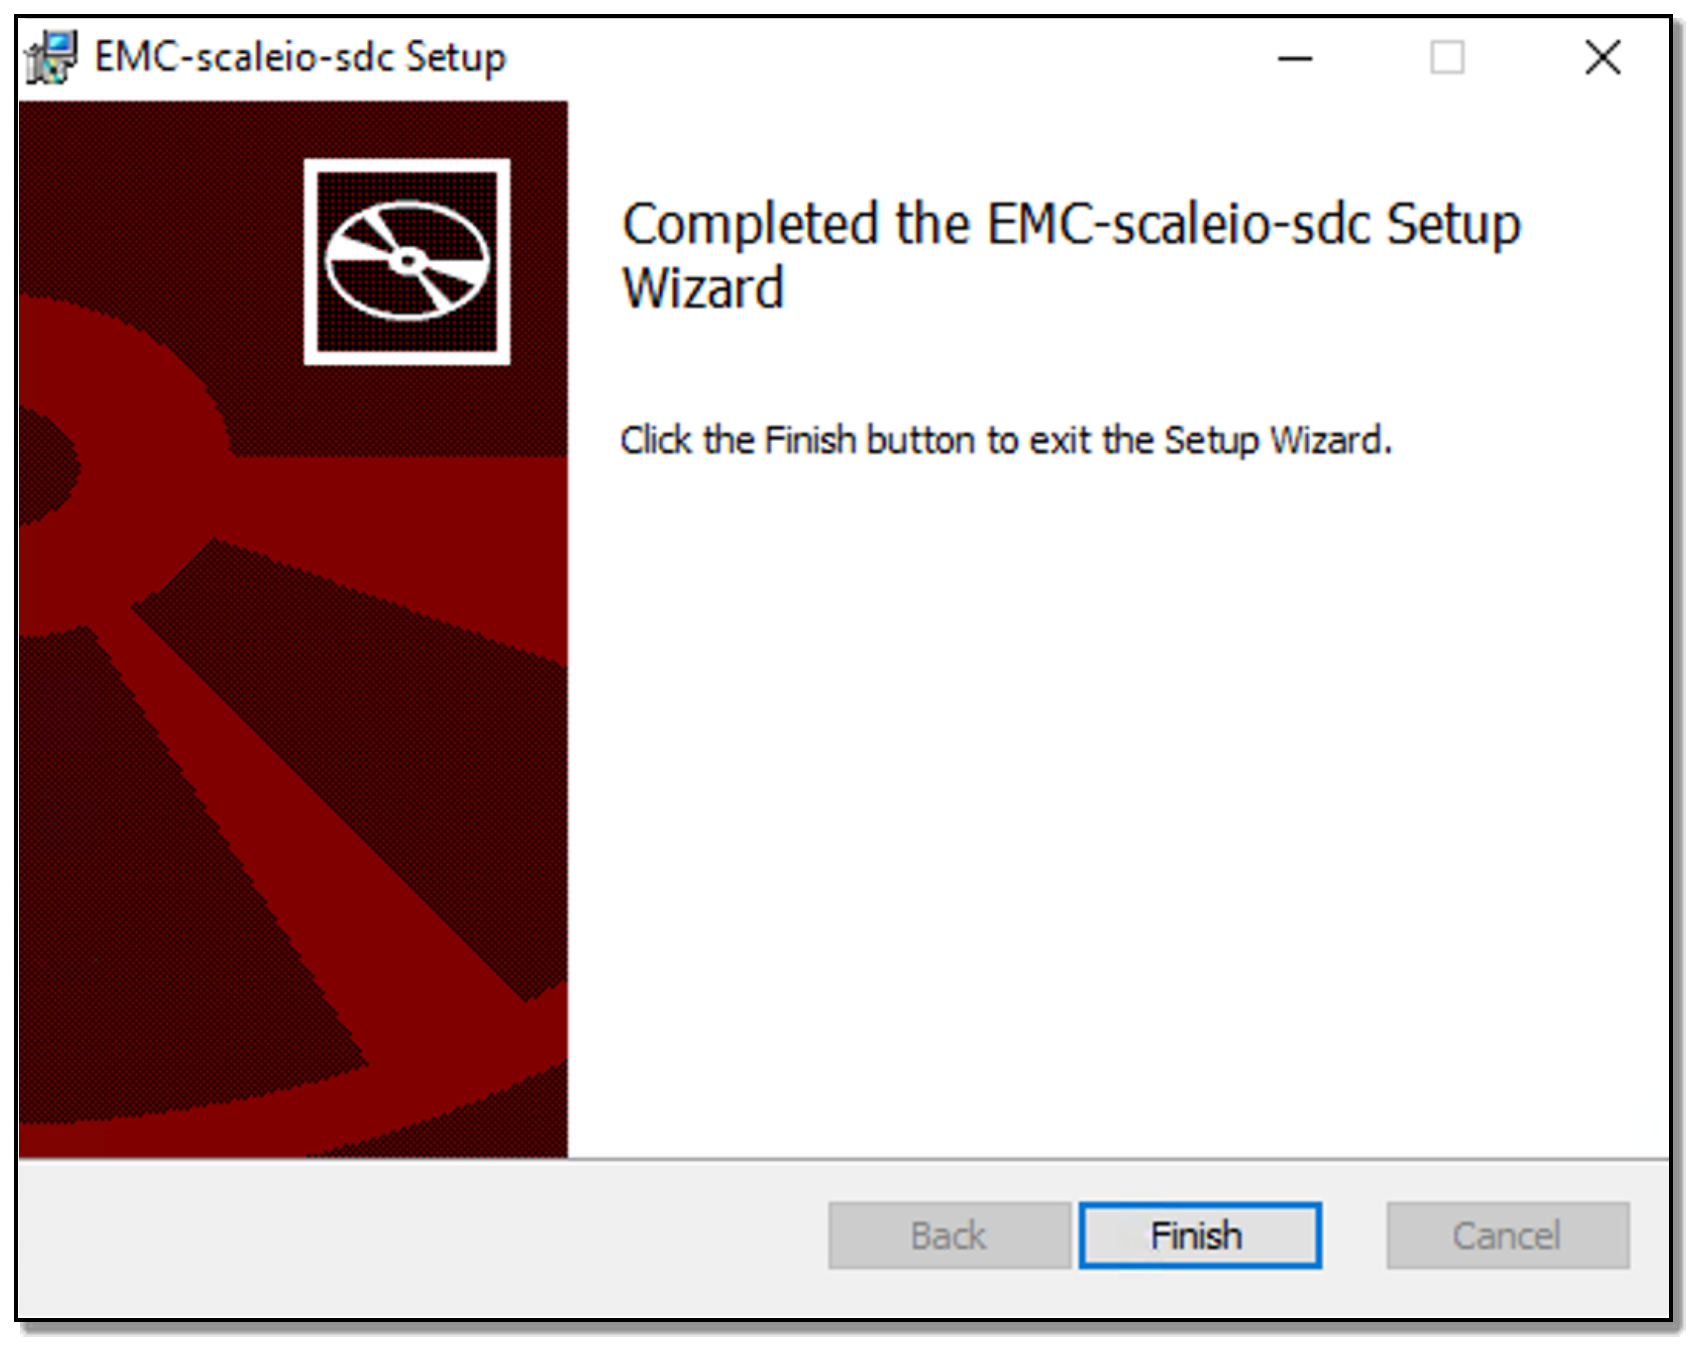 This figure shows that the installation is complete and you can exit the setup.